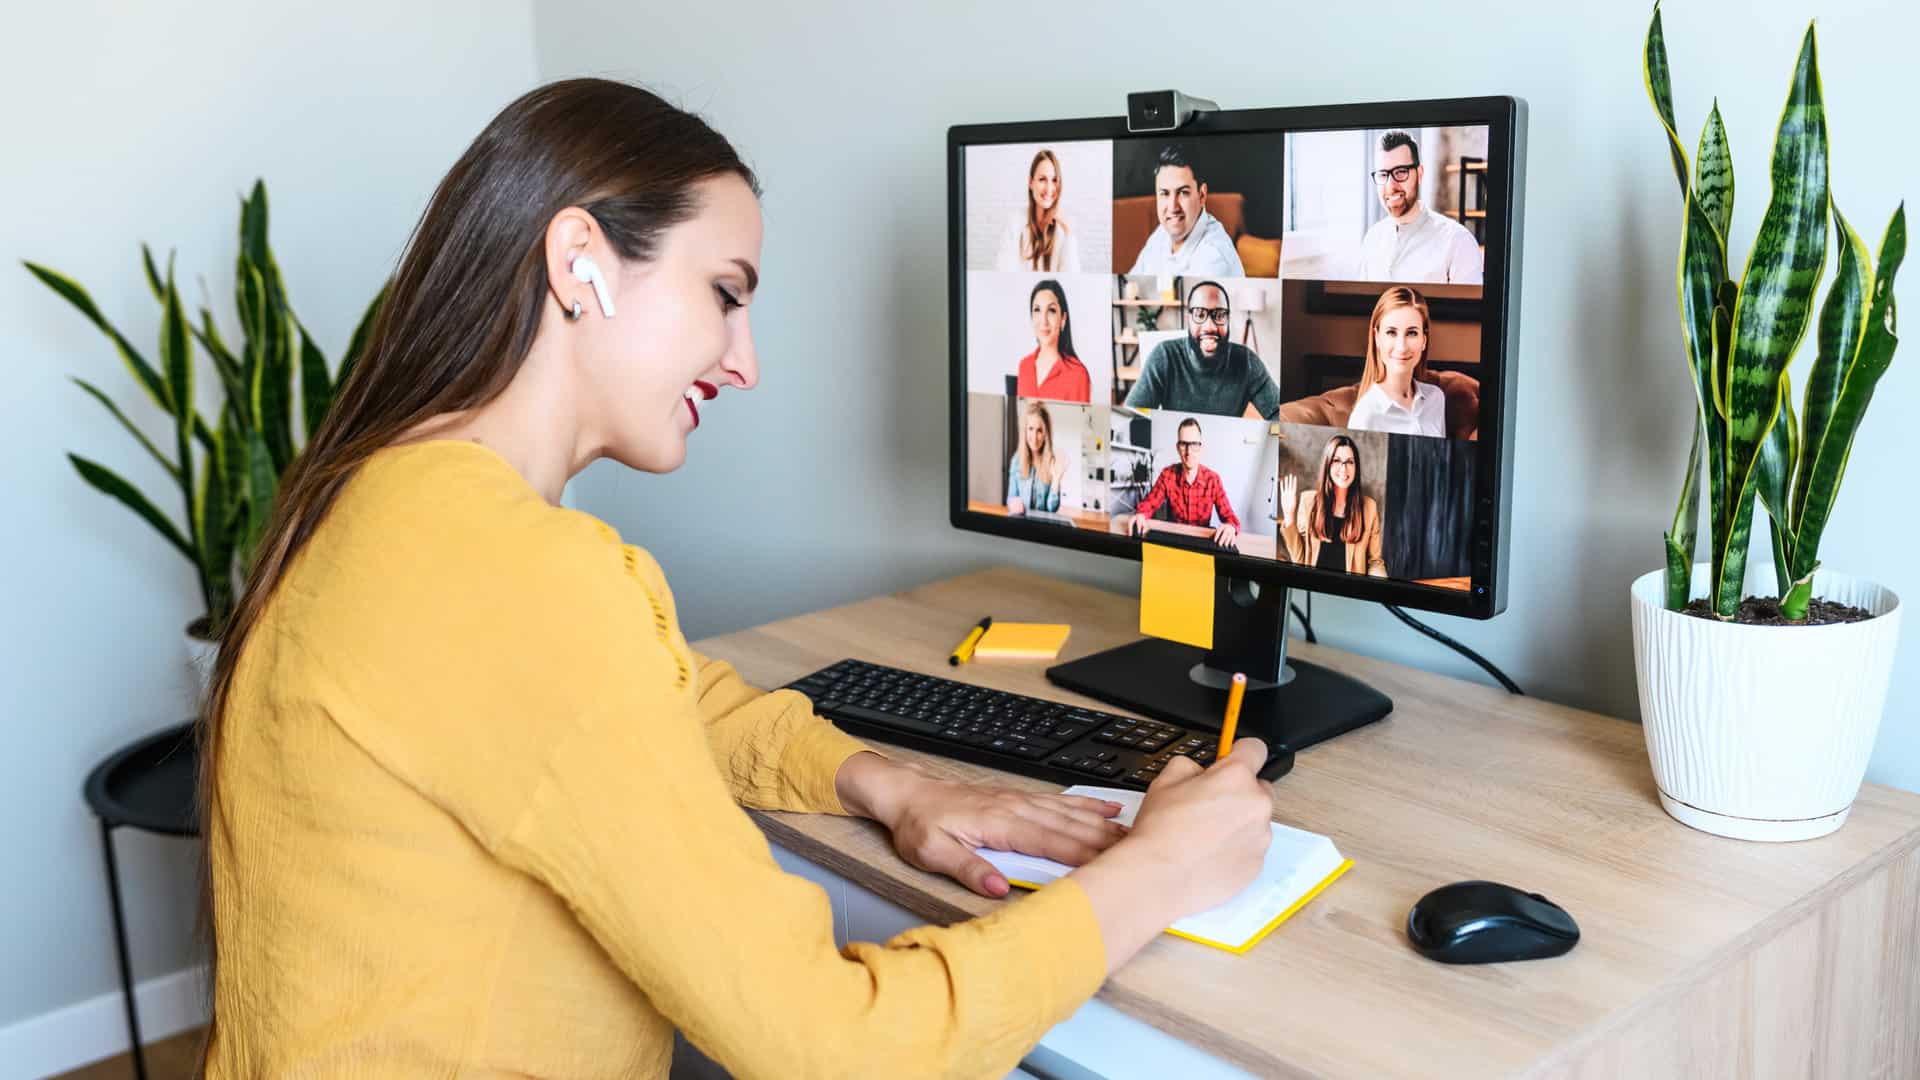 Virtual conference, morning meeting online. A young woman is using app on pc for connection with colleagues, employees, she is writing in notebook. Video call with many multiracial people togethe